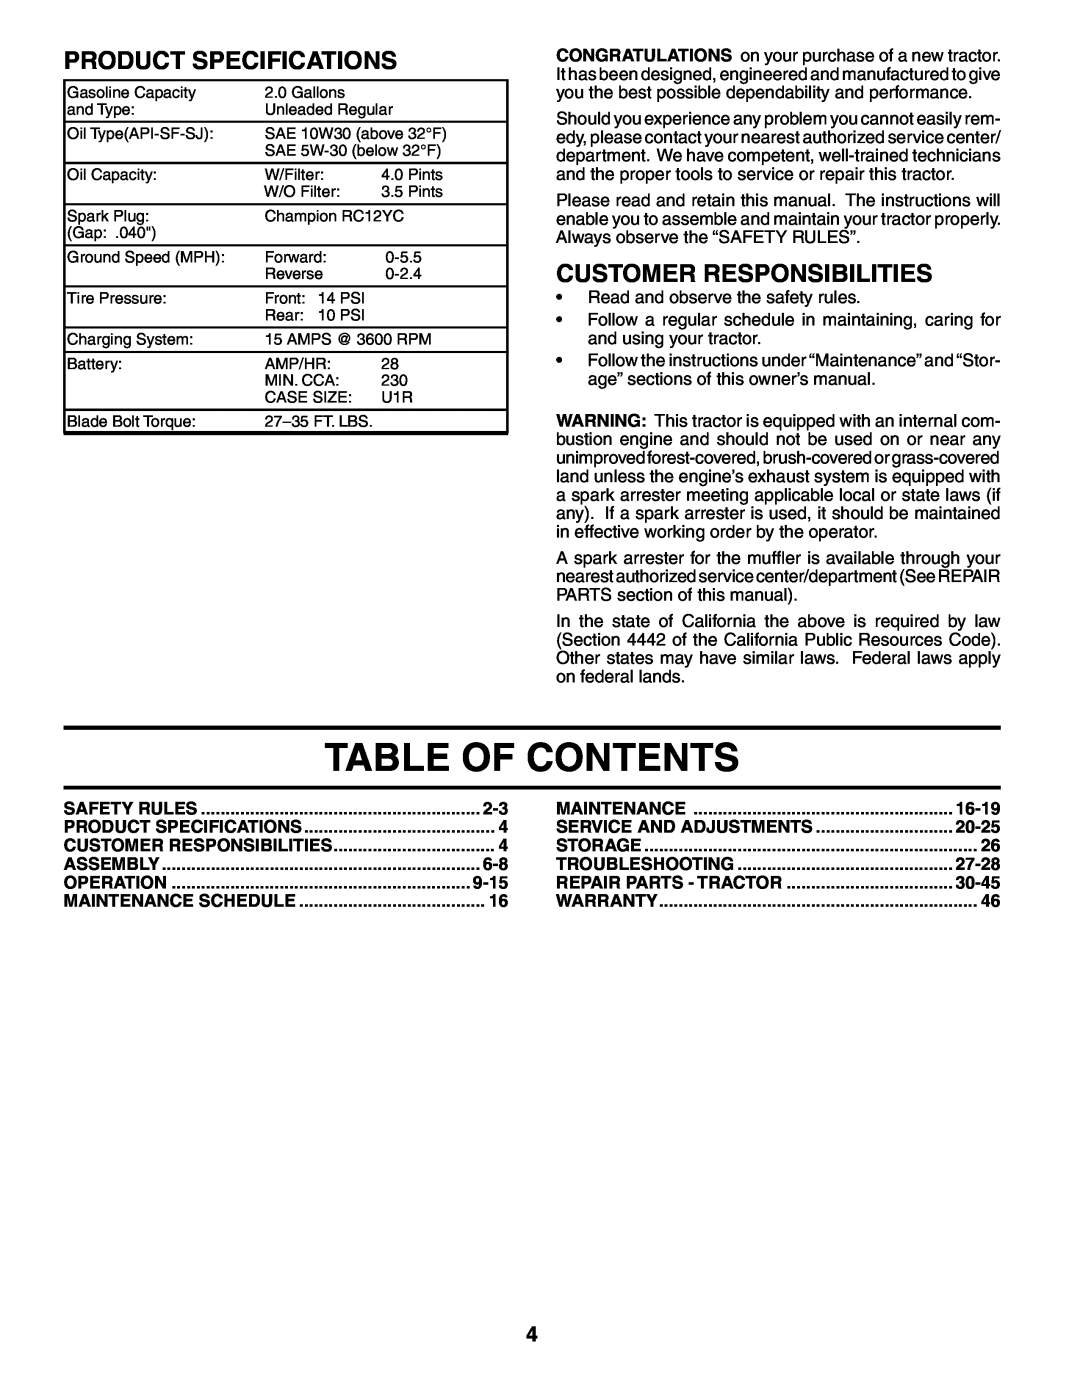 Poulan PD18H42STB owner manual Table Of Contents, Product Specifications, Customer Responsibilities 